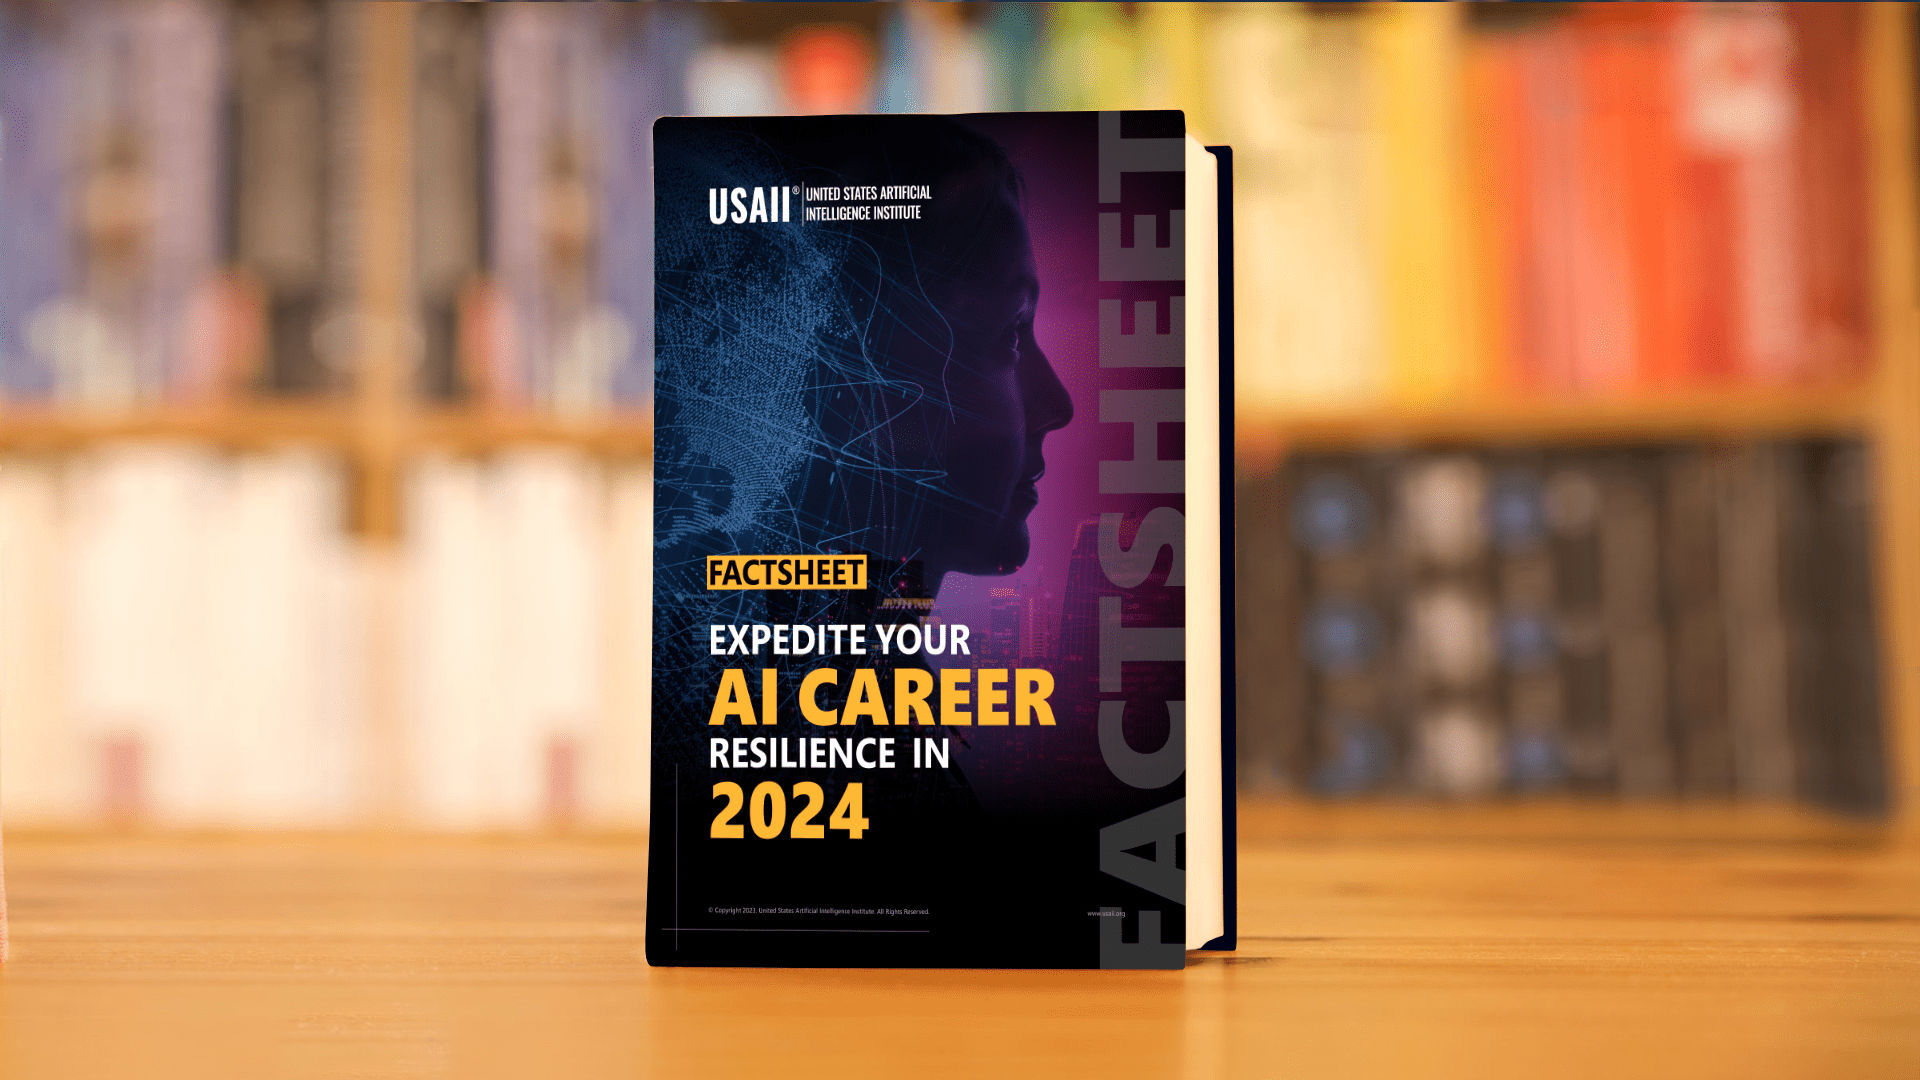 Factsheet- Expedite Your AI Career Resilience In 2024